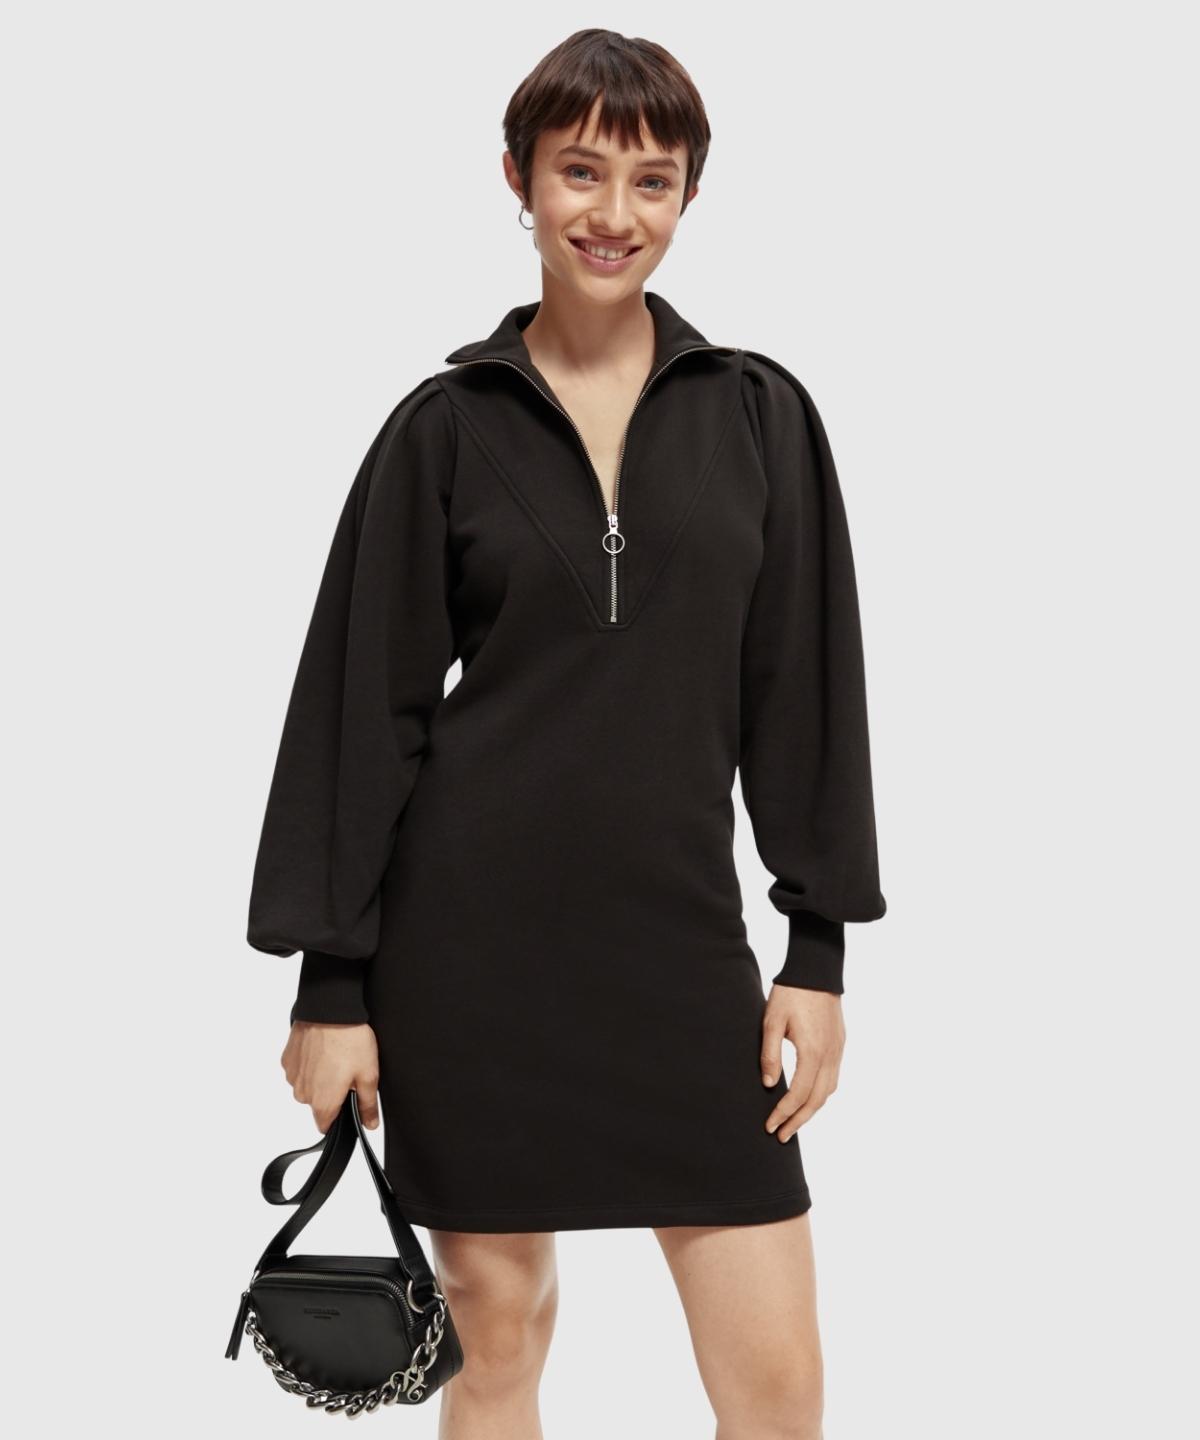 Zipped neck sweat dress with puffed sleeves